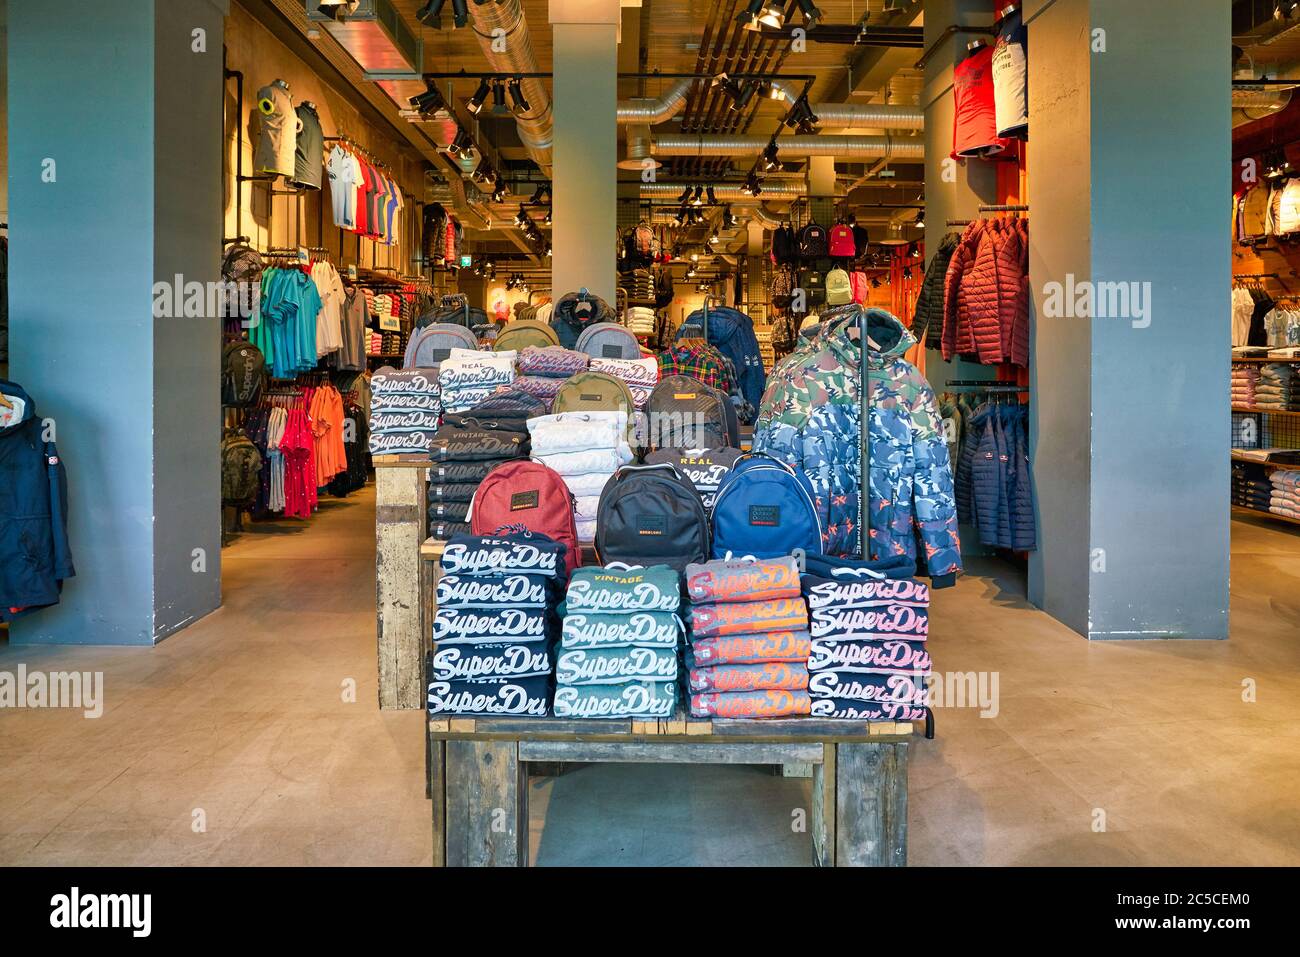 Superdry Germany High Resolution Stock Photography and Images - Alamy